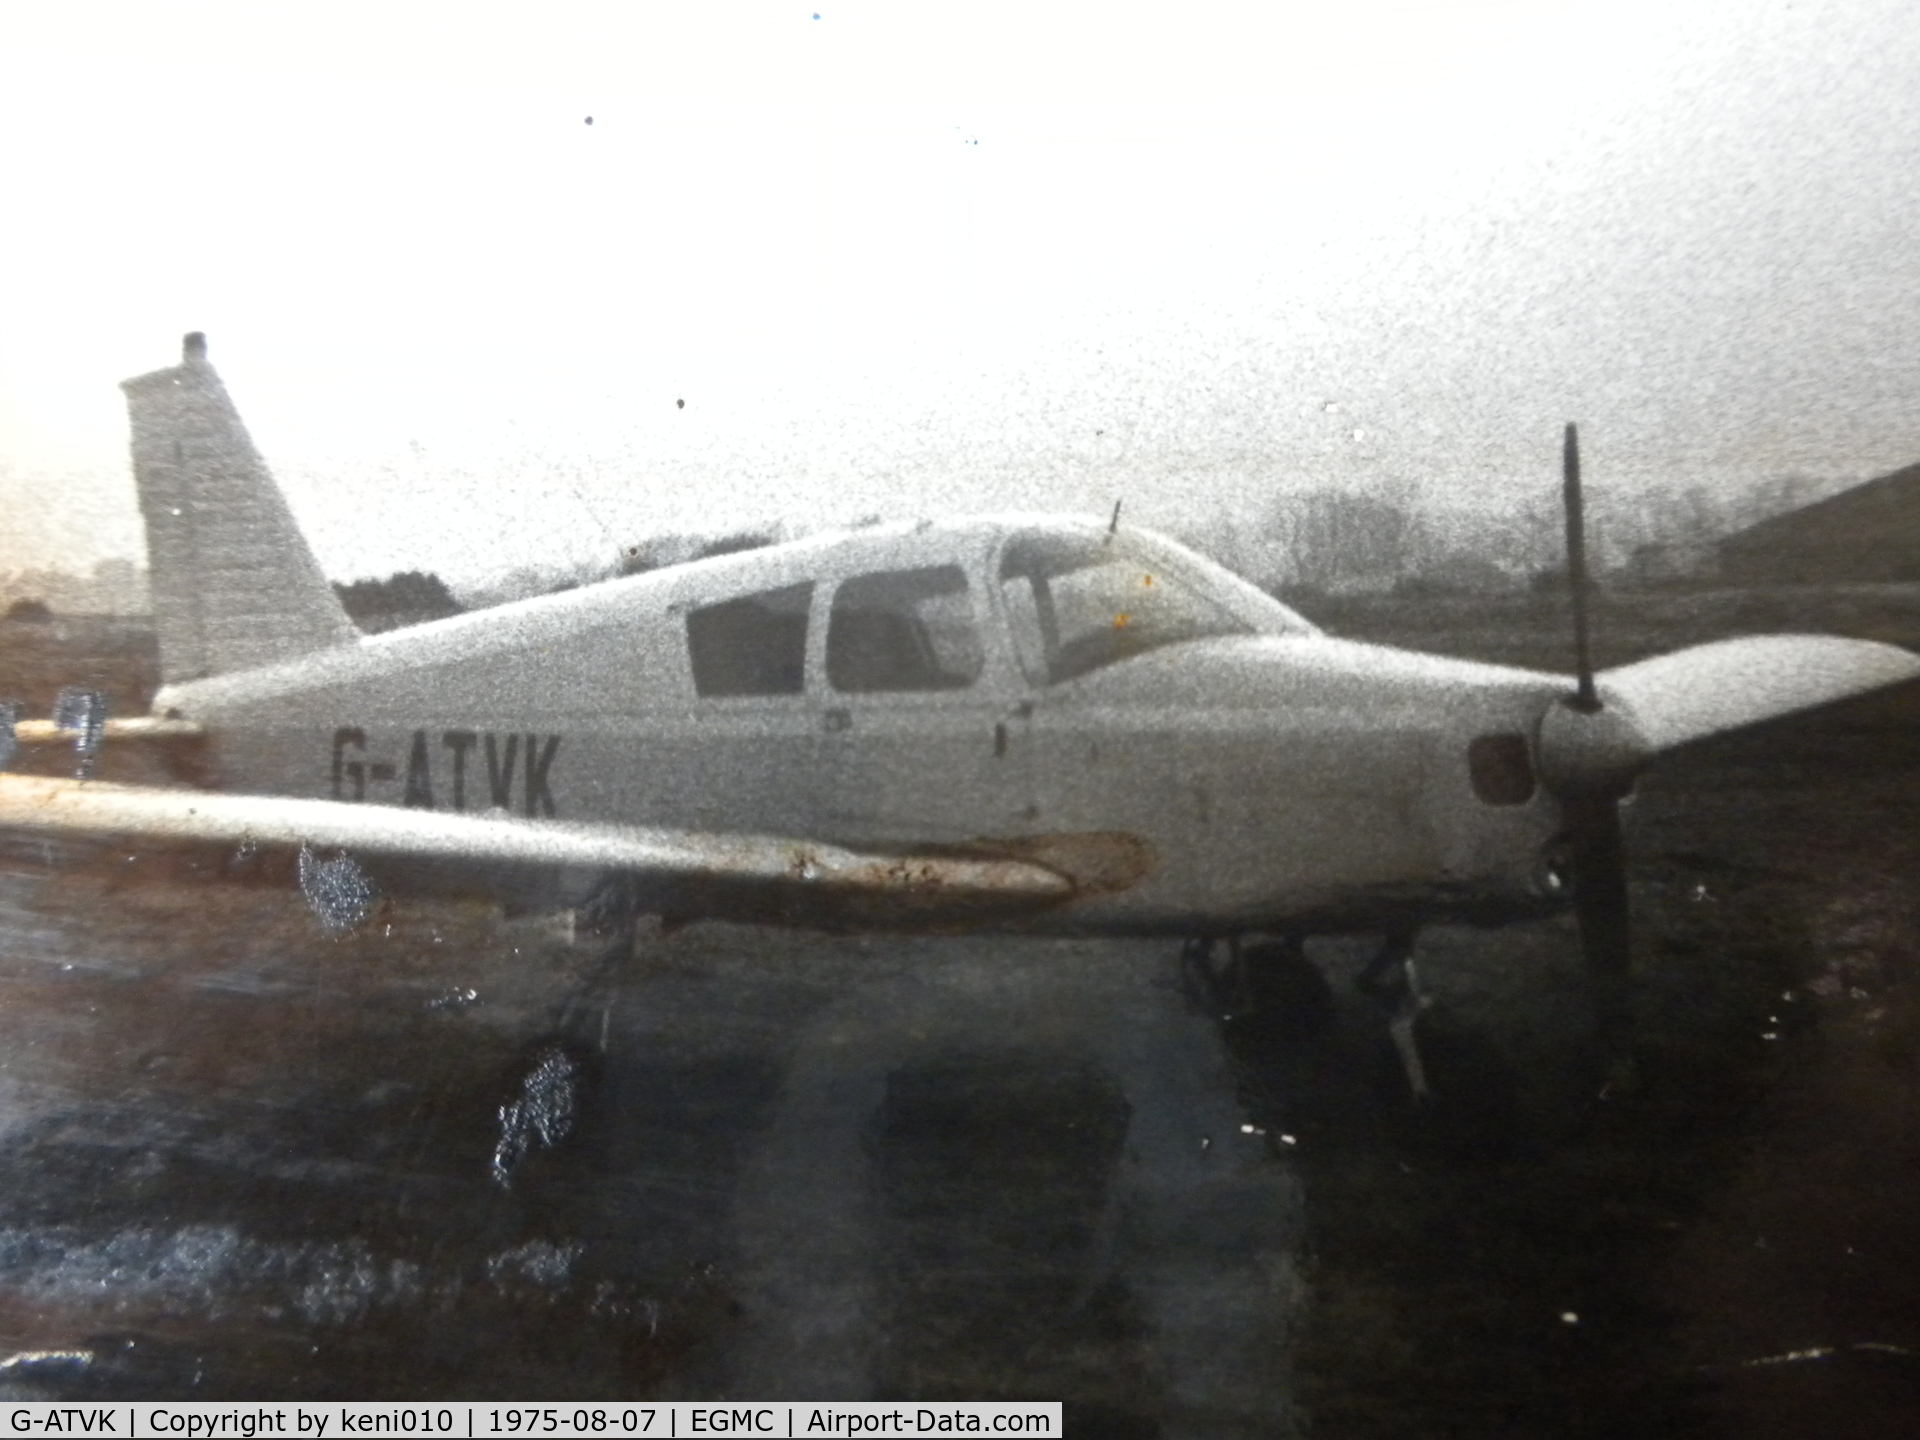 G-ATVK, 1966 Piper PA-28-140 Cherokee C/N 28-22006, Learned to fly in this and other 140's, at Southend 1974/5. Took this one over to France & Belgium a few times. It was a bit scruffy when I was using it, matt light blue and white. Apologies for poor photo sadly it's the only one I have. 